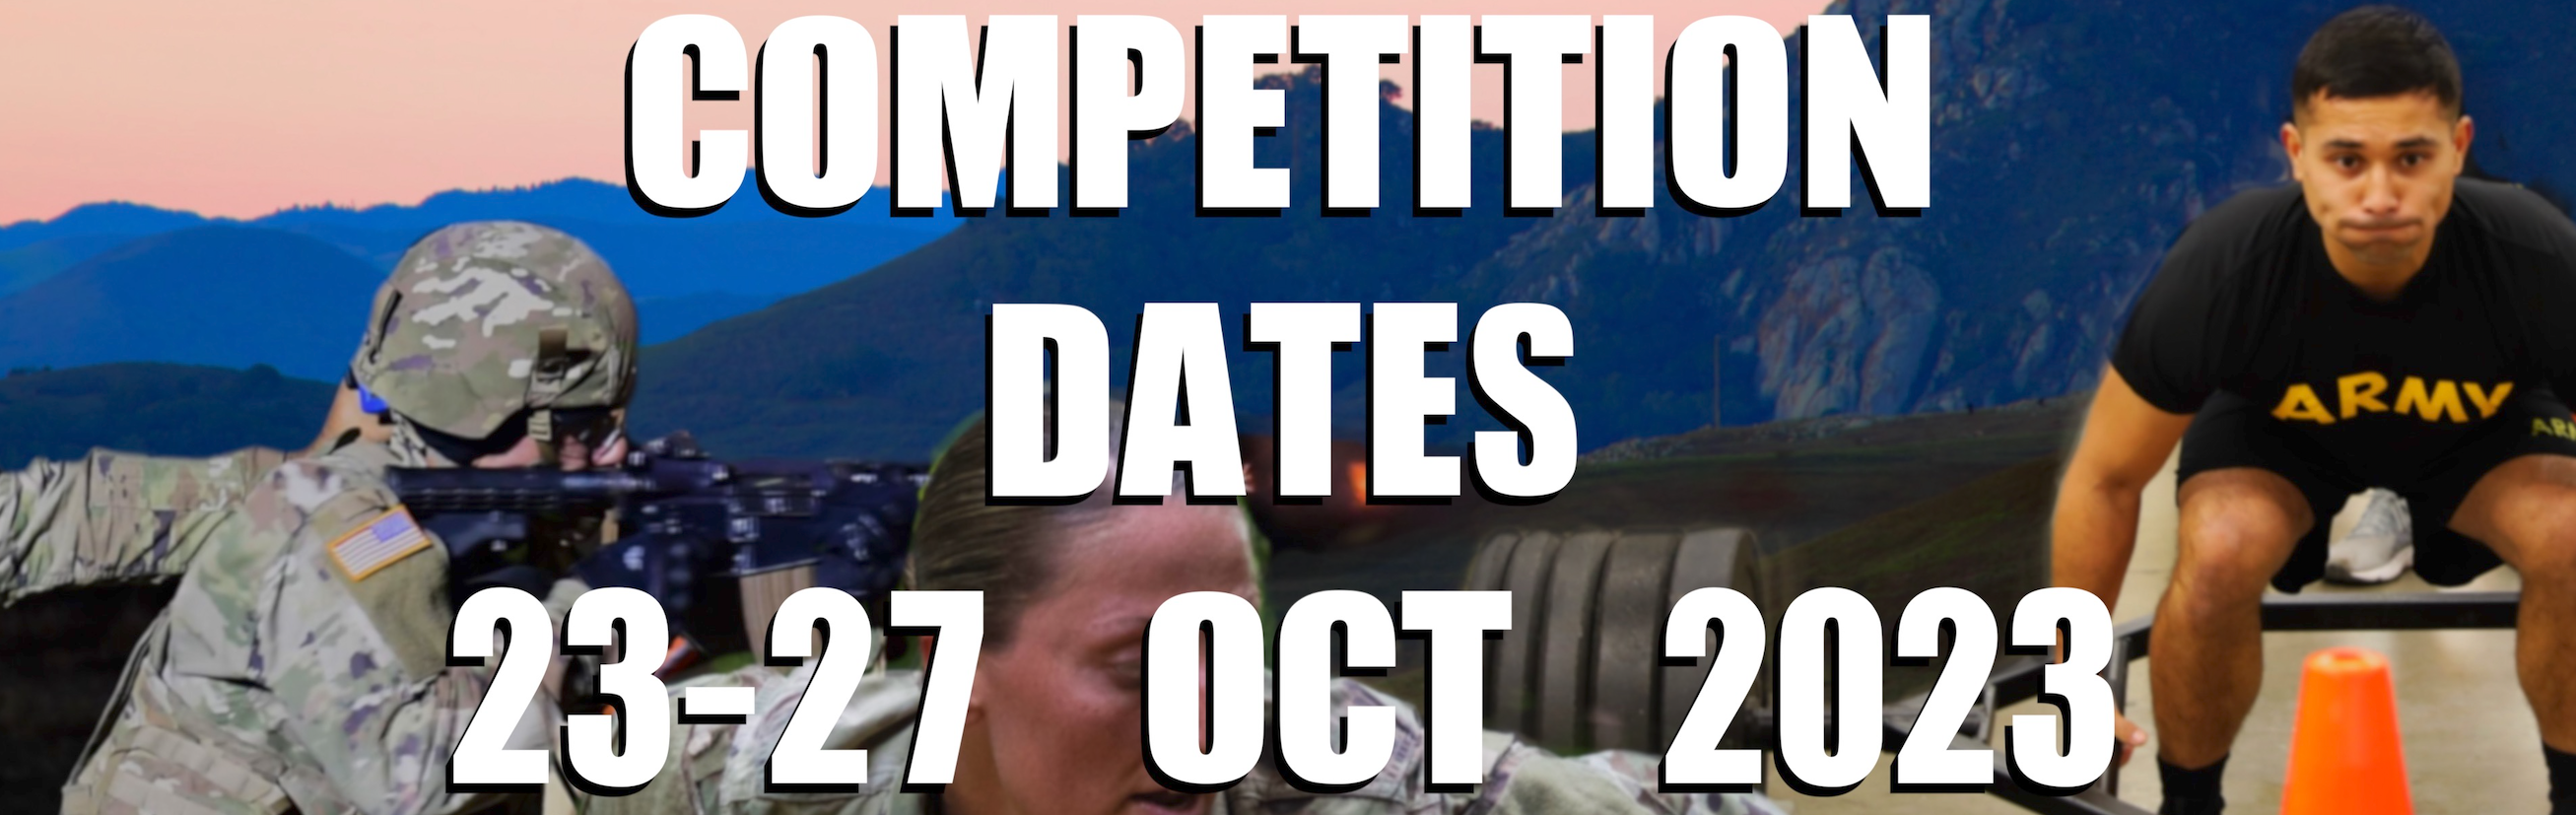 BWC Competition Dates Banner